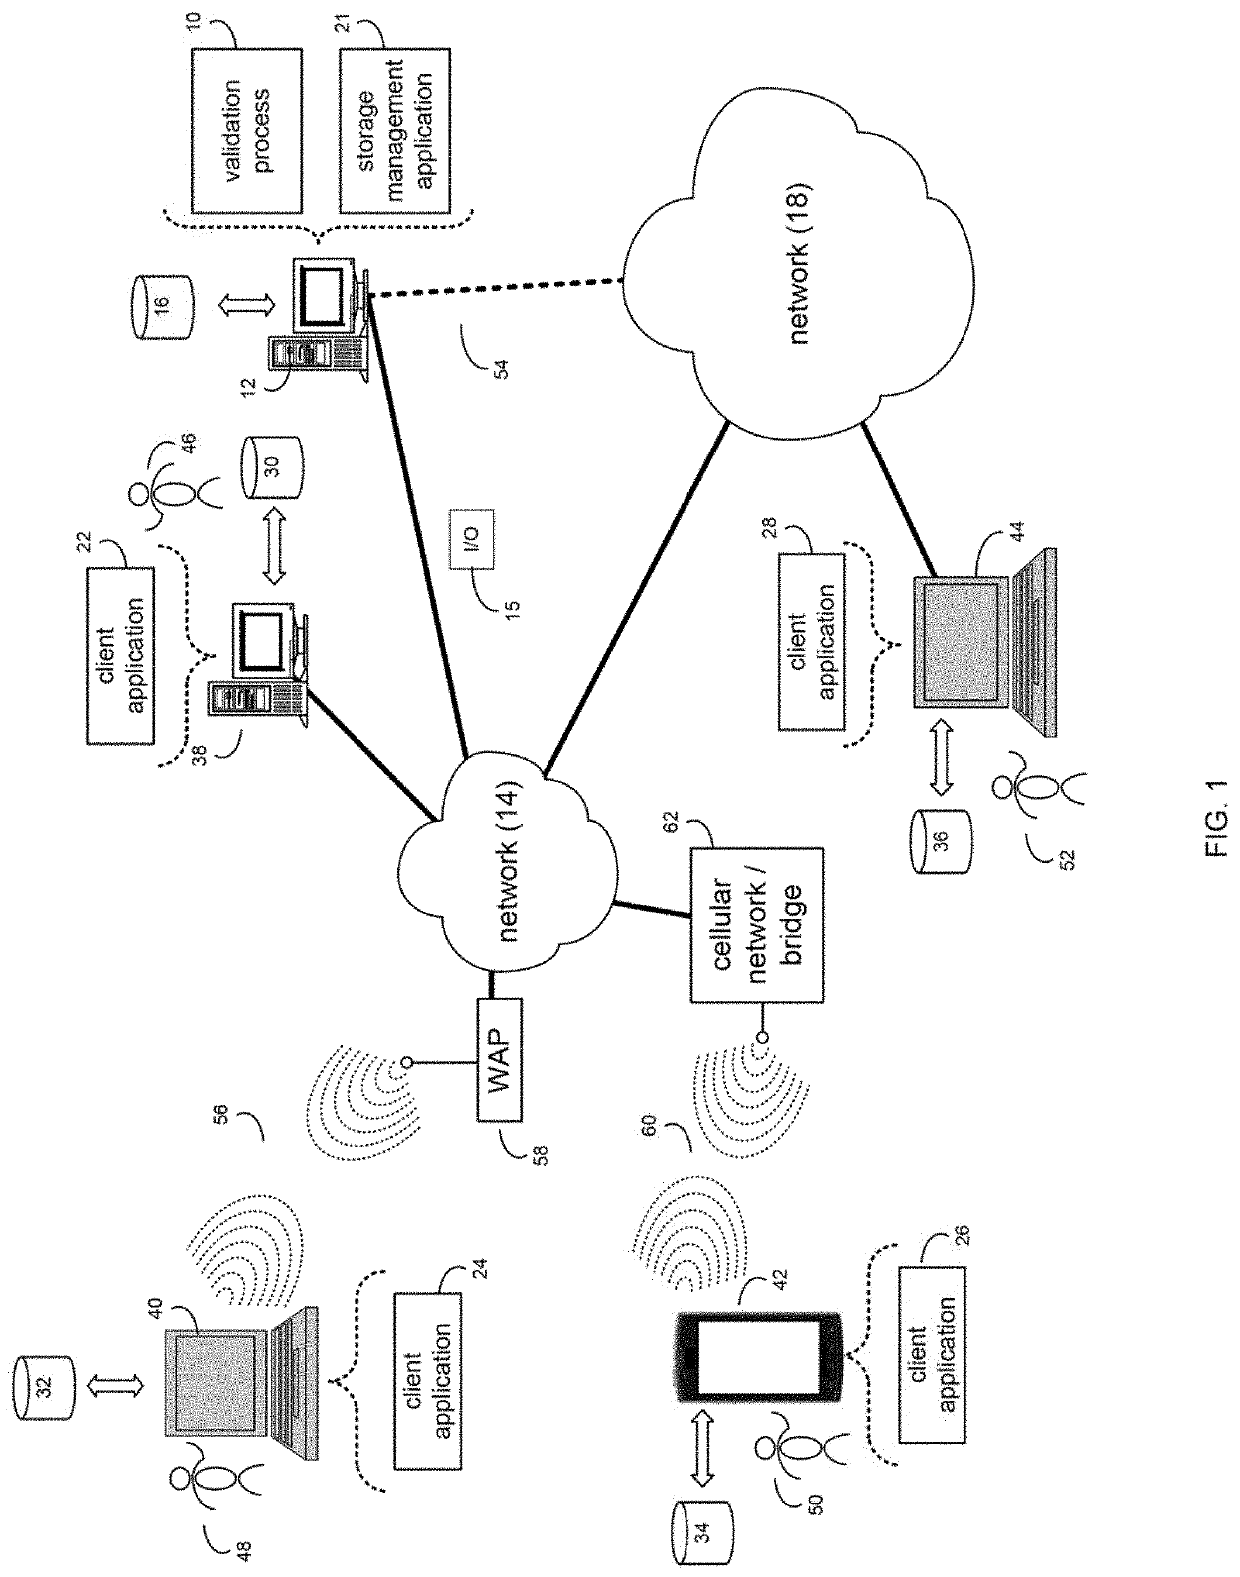 System and method for network validation architecture for clustered and federated storage systems